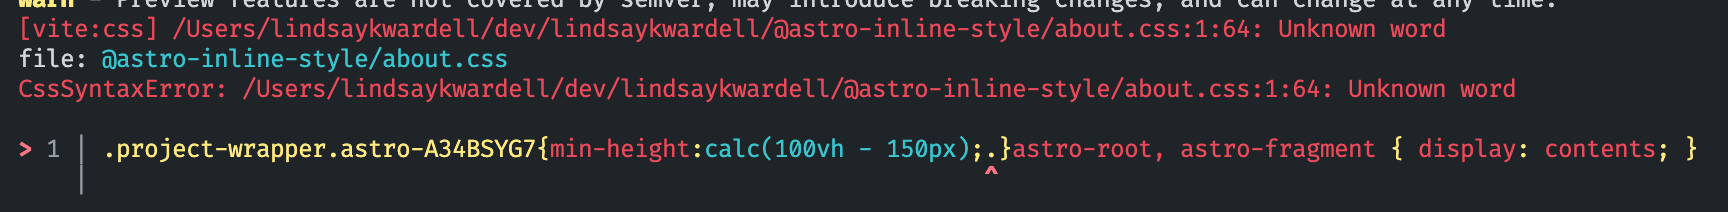 Build error showing that a CSS value was invalid, due to an extra dot after a semicolon.